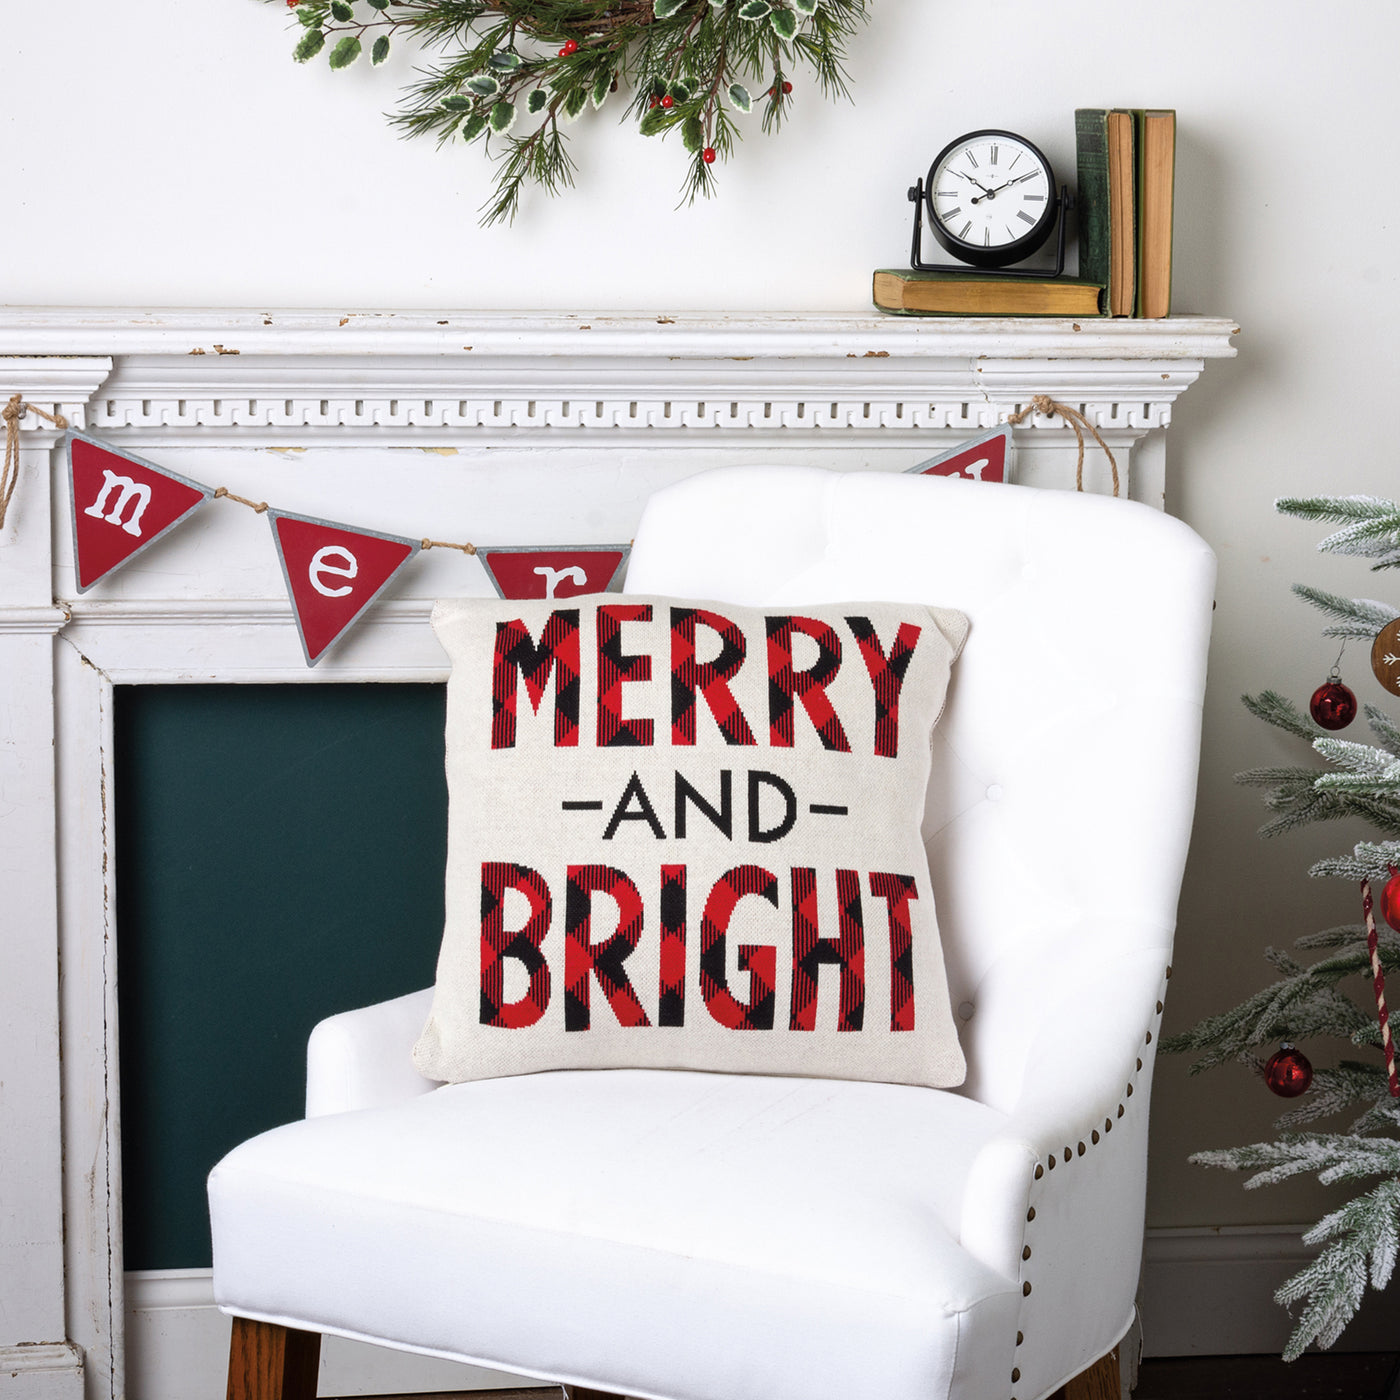 Merry and Bright 18" Knitted Christmas Throw Pillow